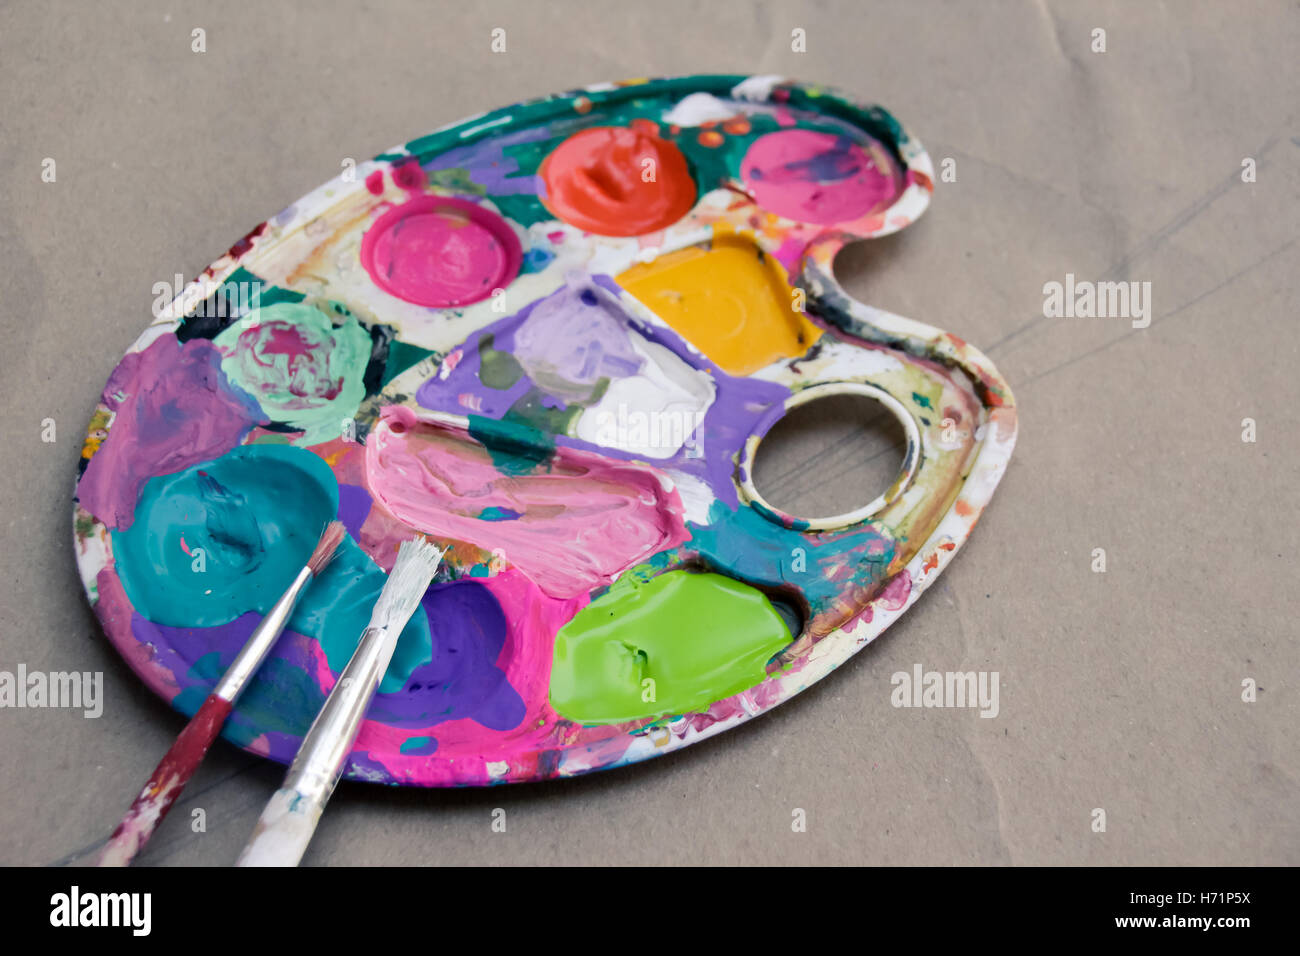 Photograph of an art palette with paint and brushes Stock Photo